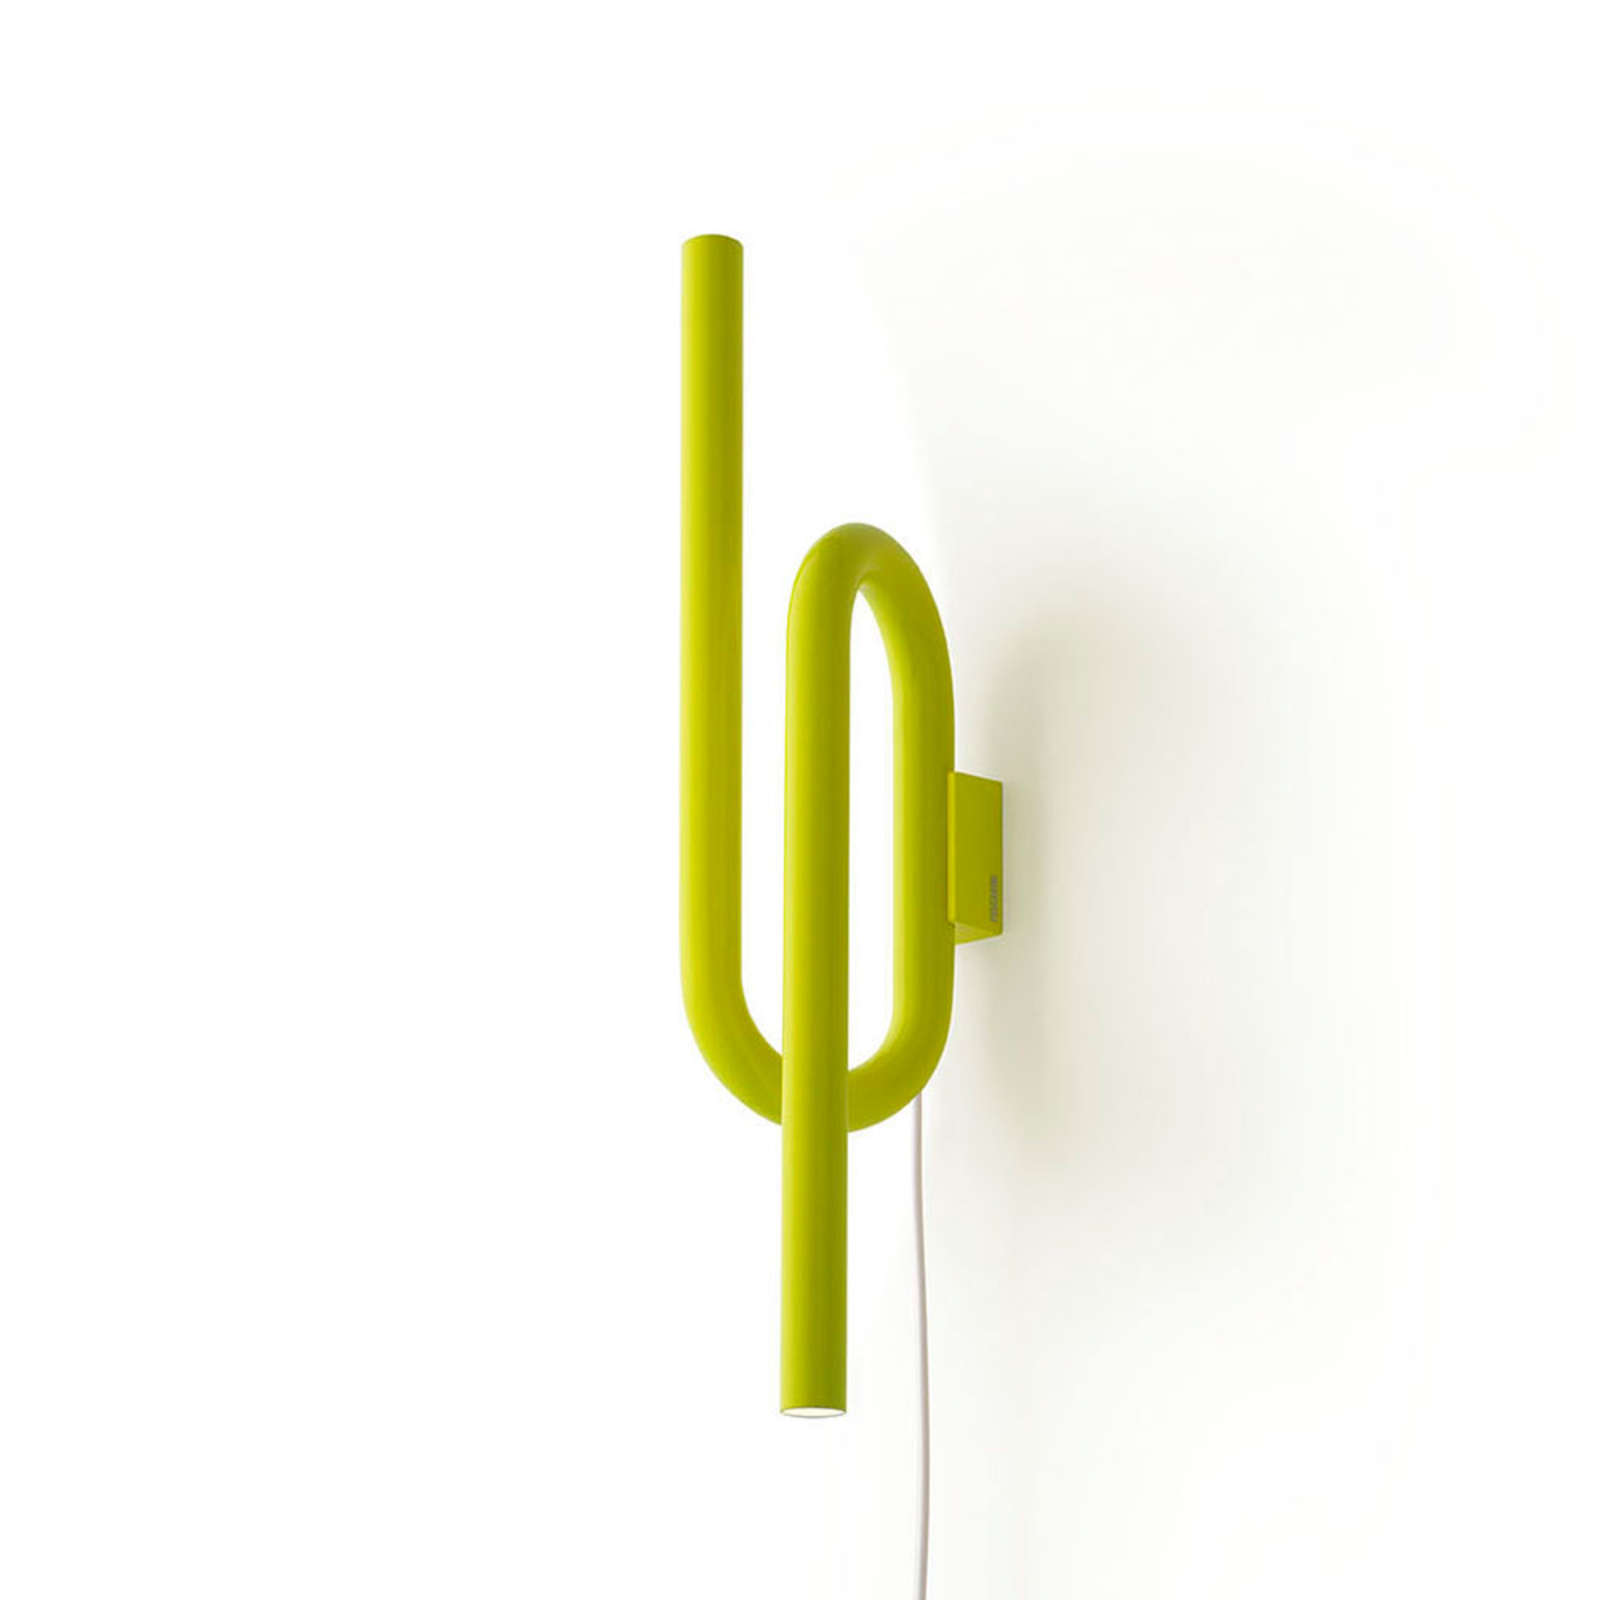 Foscarini Tobia LED wall light with cable yellow